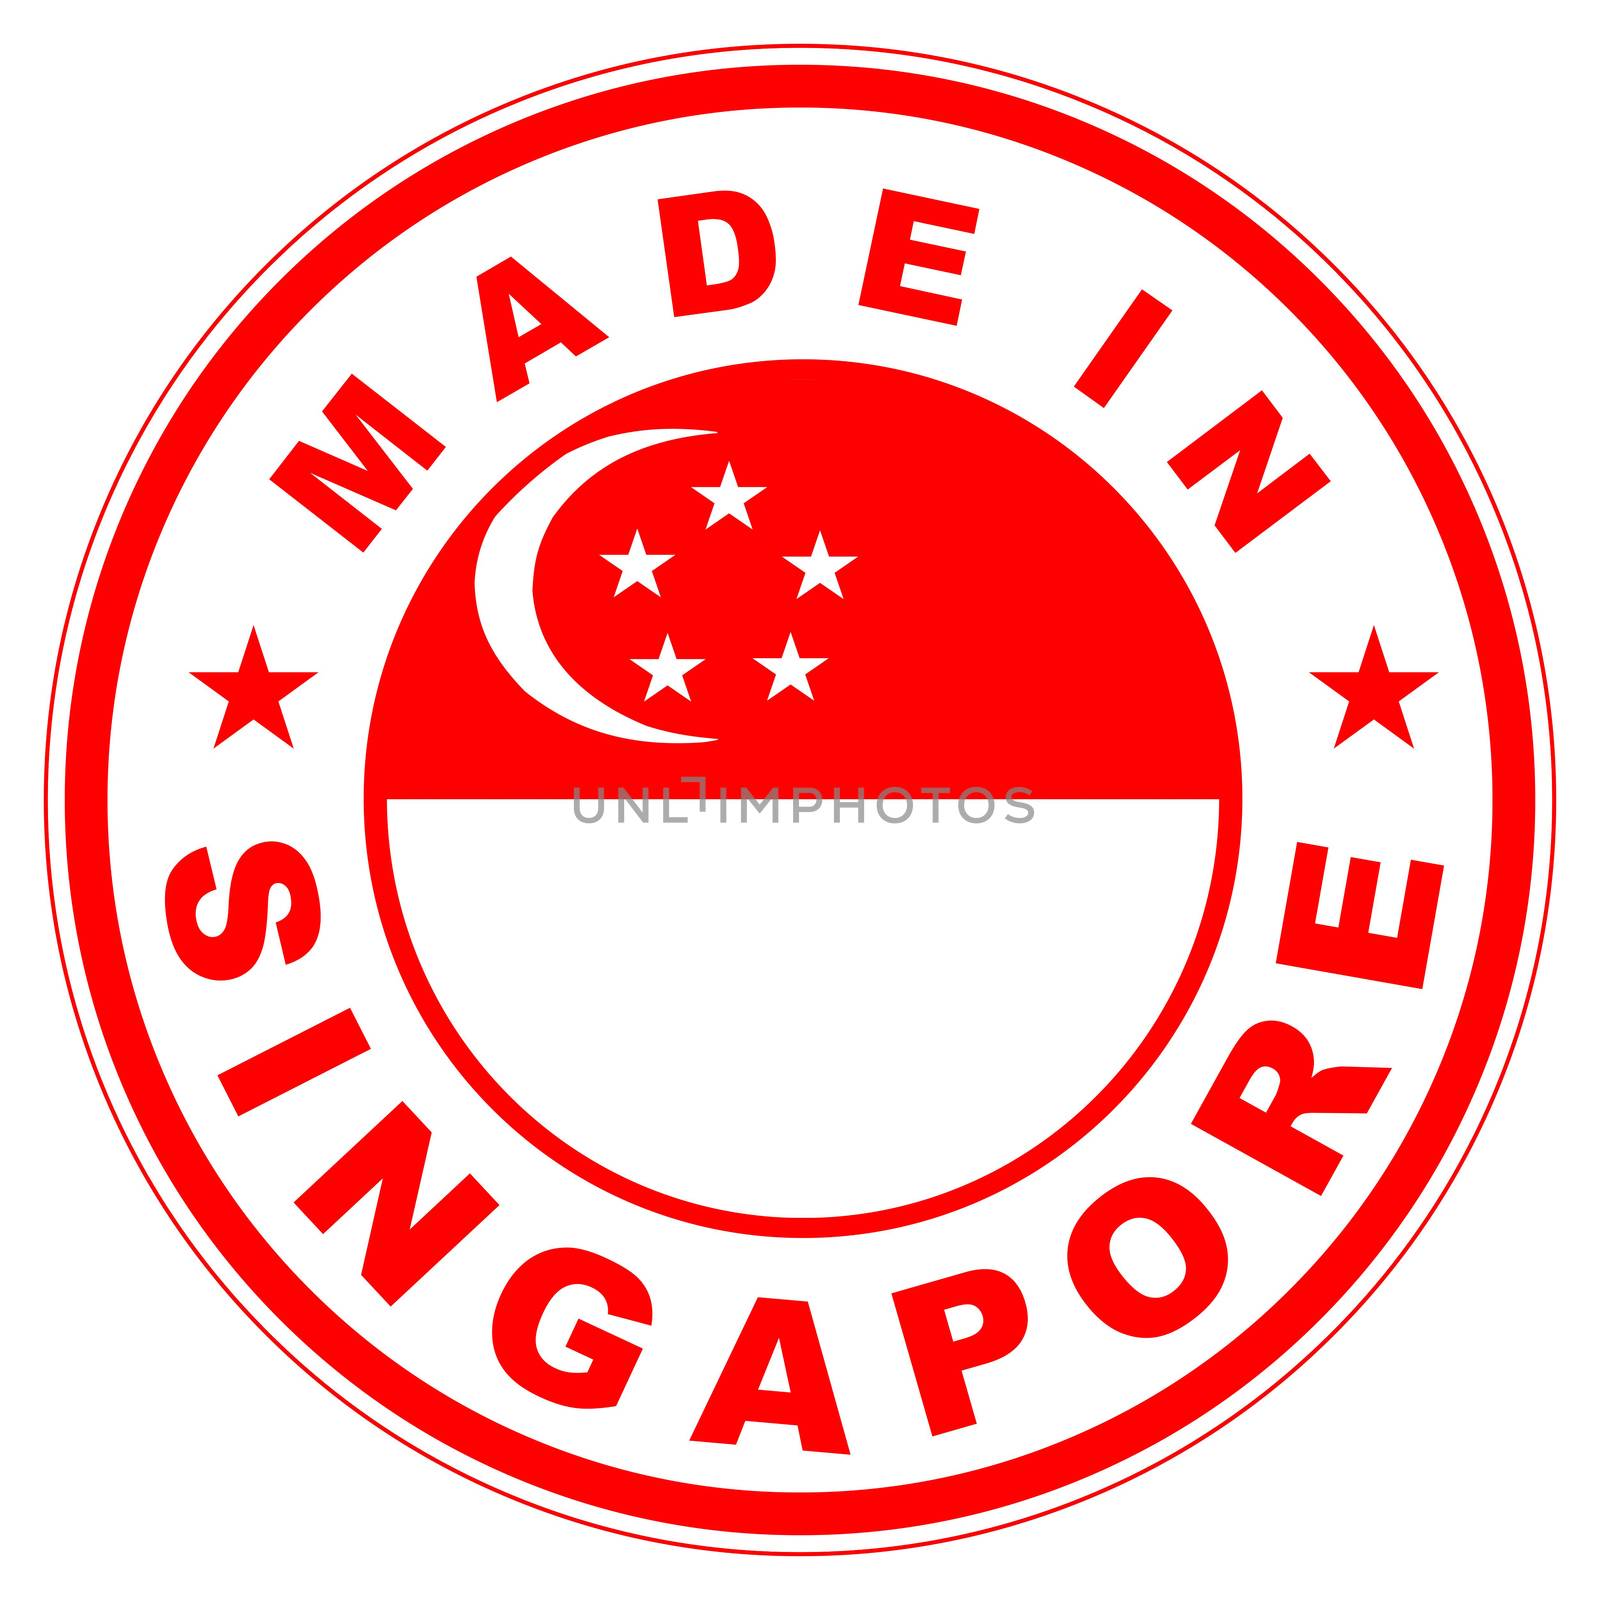 made in singapore by tony4urban